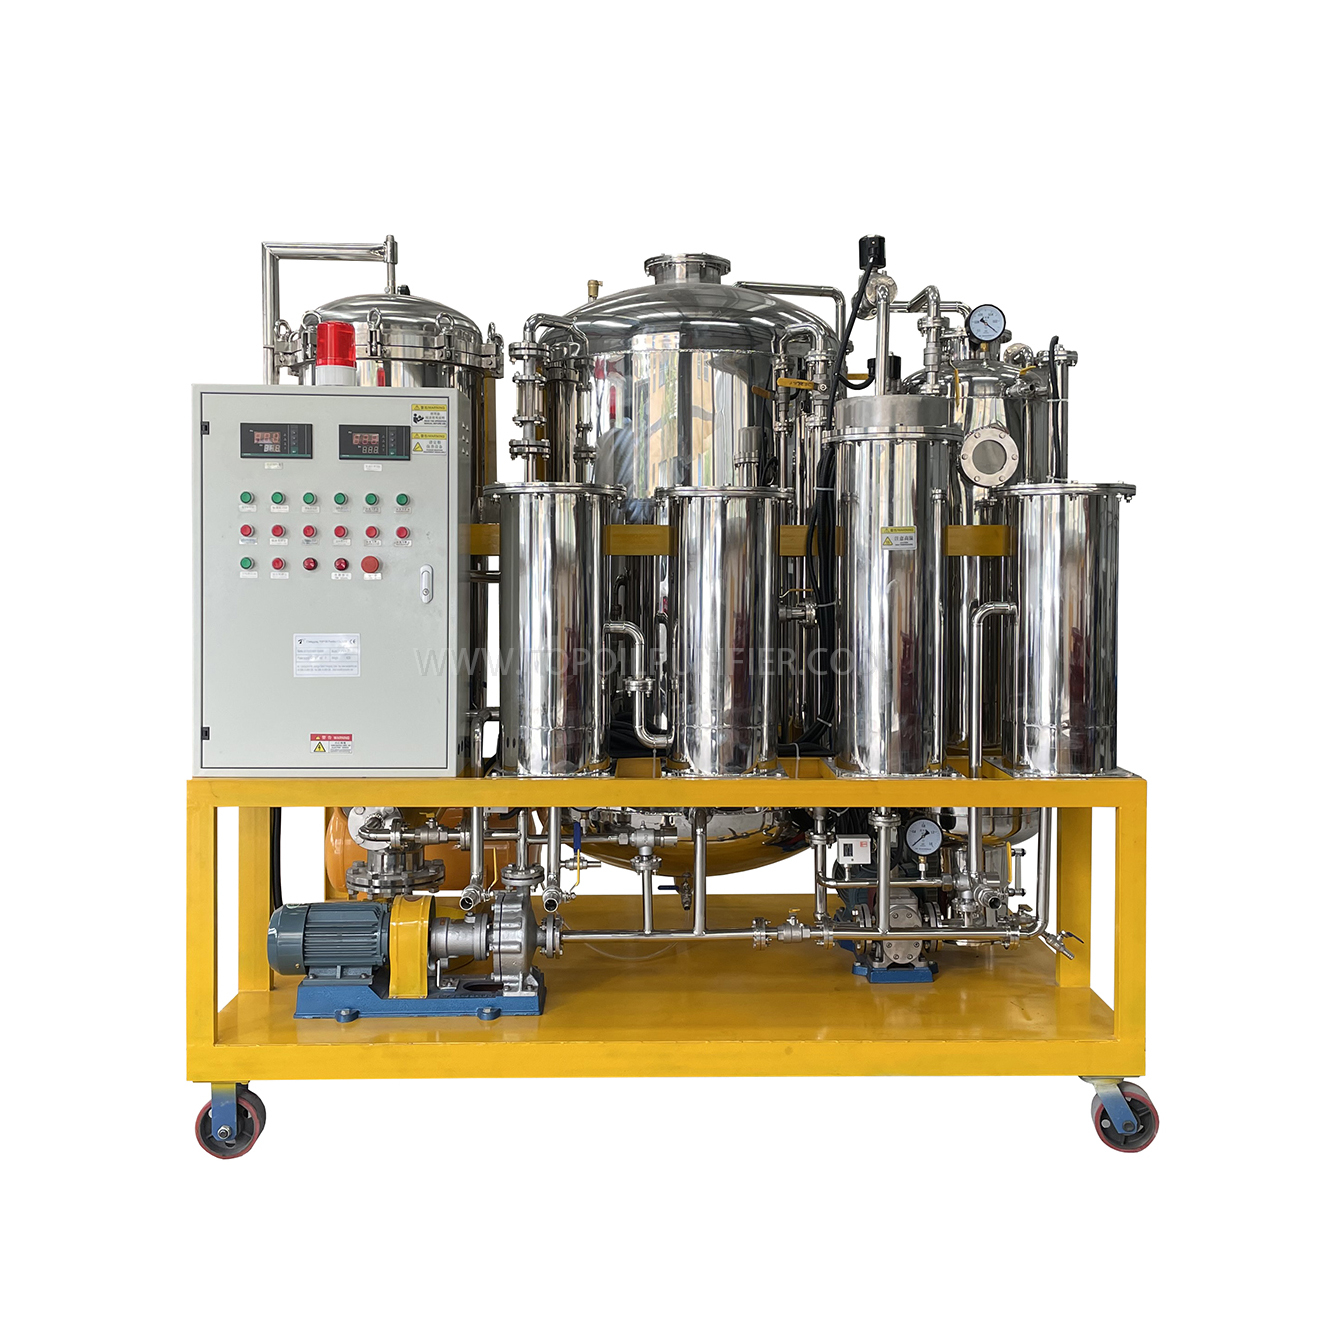 TYS Food Grade Stainless Steel Oil Purification and Decoloration Equipment